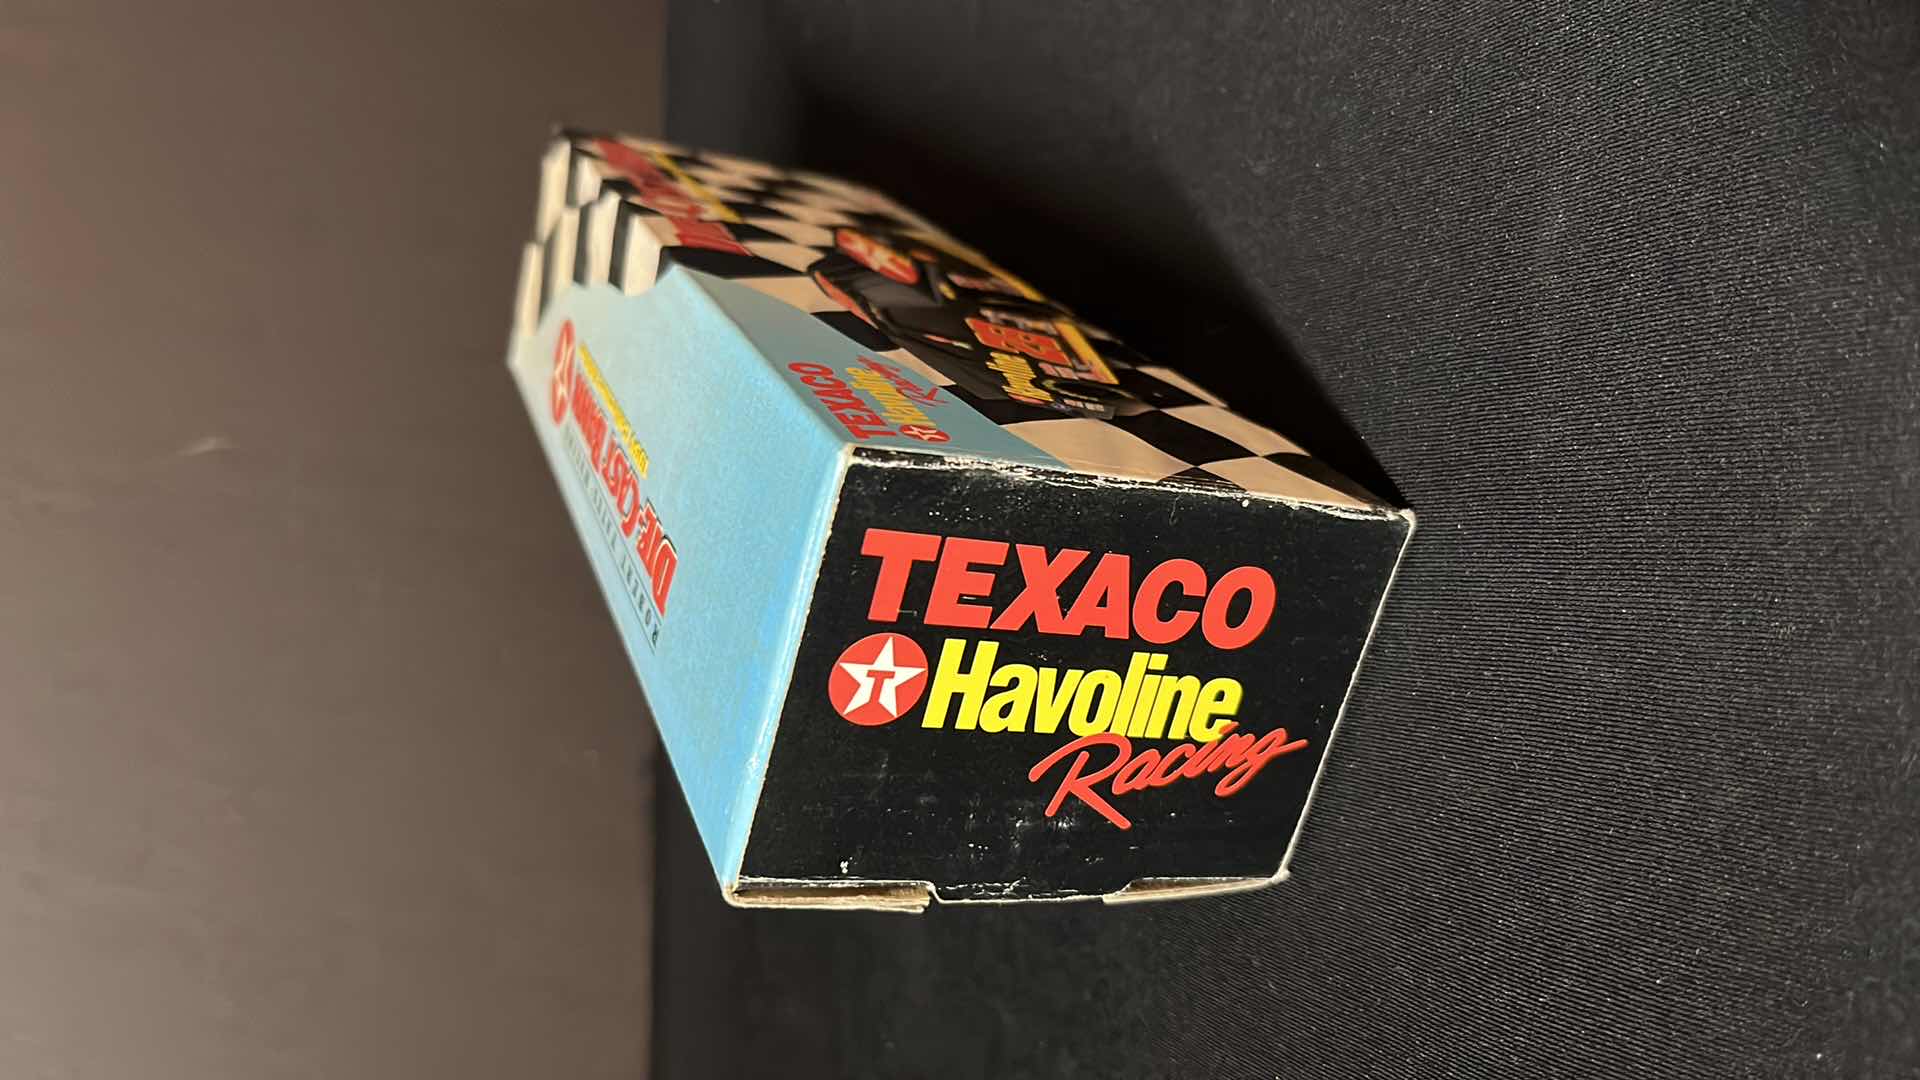 Photo 6 of RACING COLLECTIBLES TEXACO HAVOLINE RACING DIE-CAST BANK W KEY, 1994 FORD THUNDERBIRD COLLECTORS EDITION (STOCK NO 249401121-2)